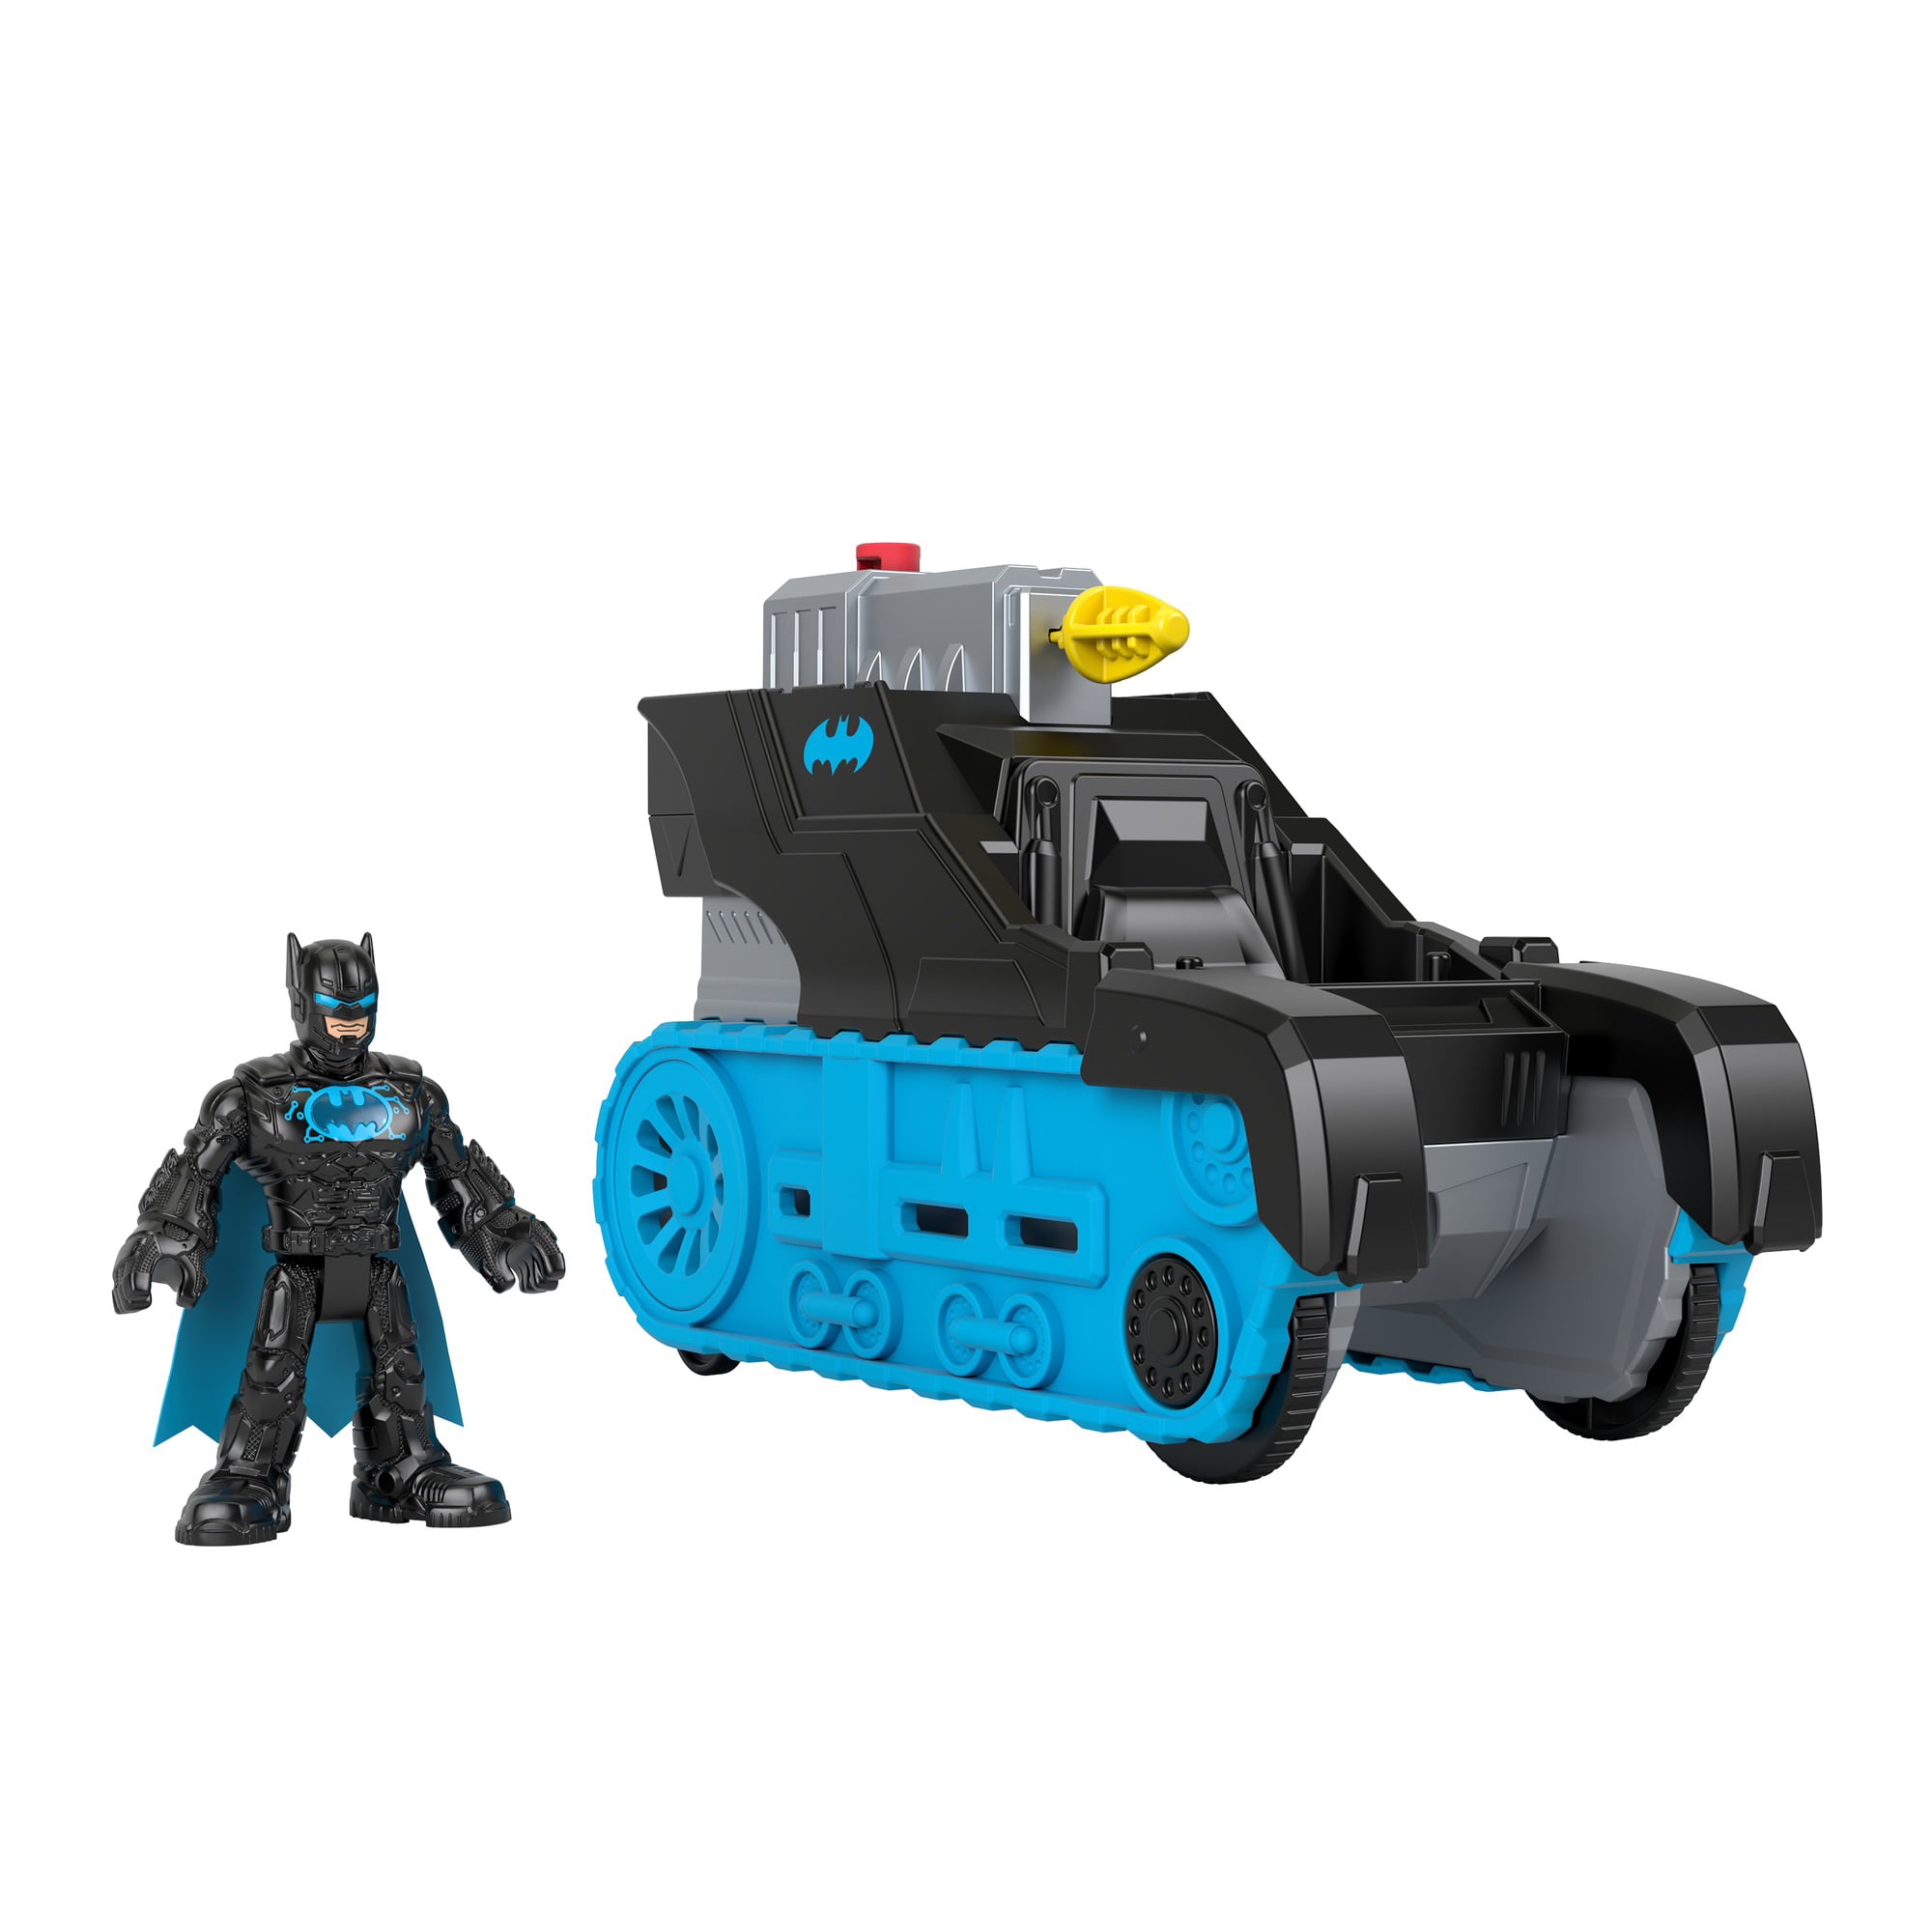 Fisher-Price Imaginext Gotham City Tower Blue bat cycle drone NEW Batman Streets 